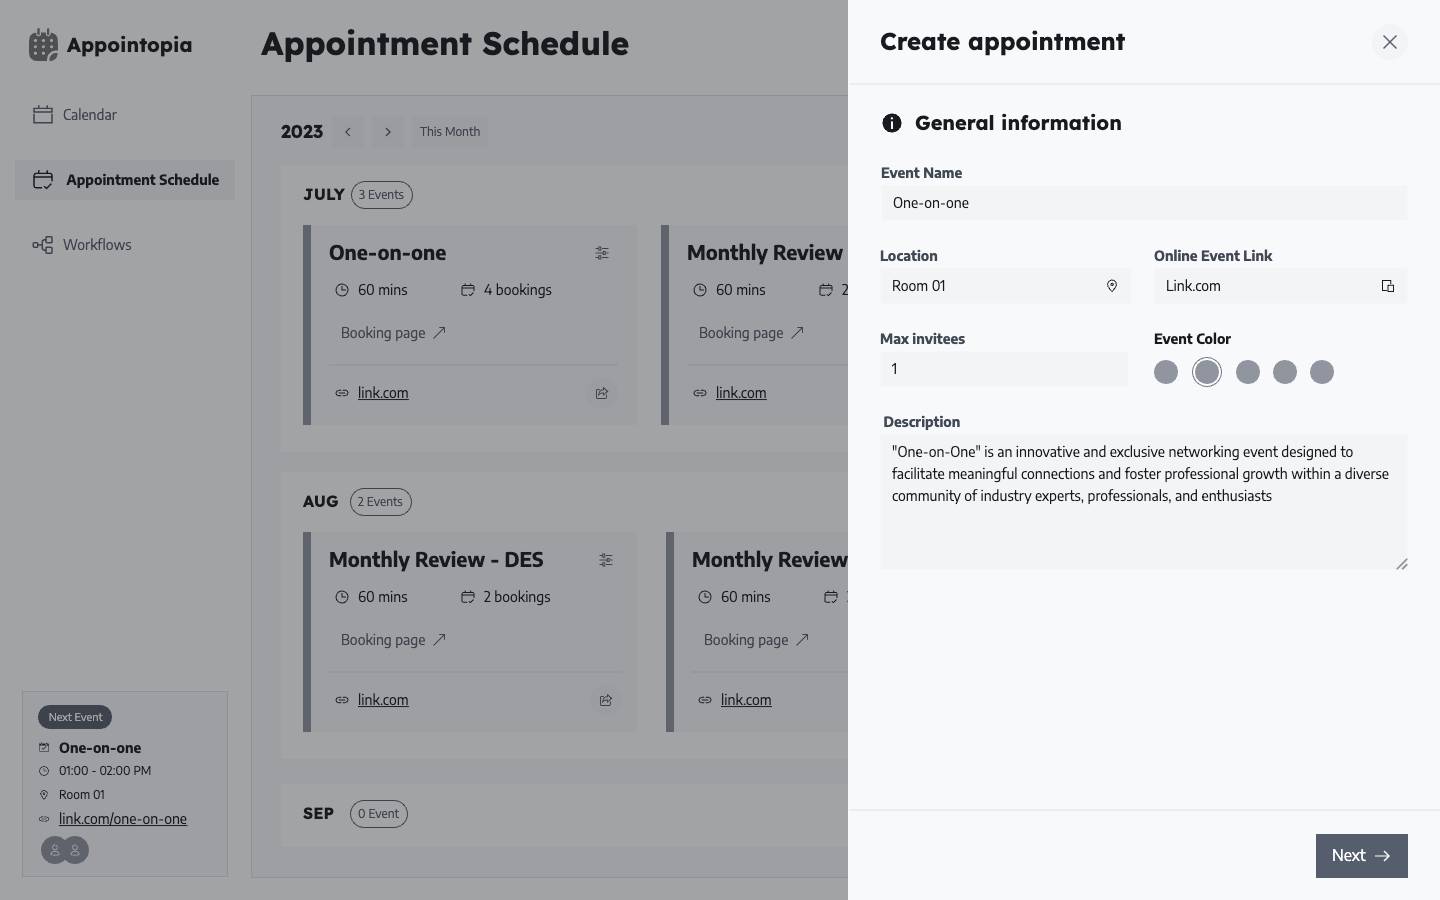 Create an appointment - General information